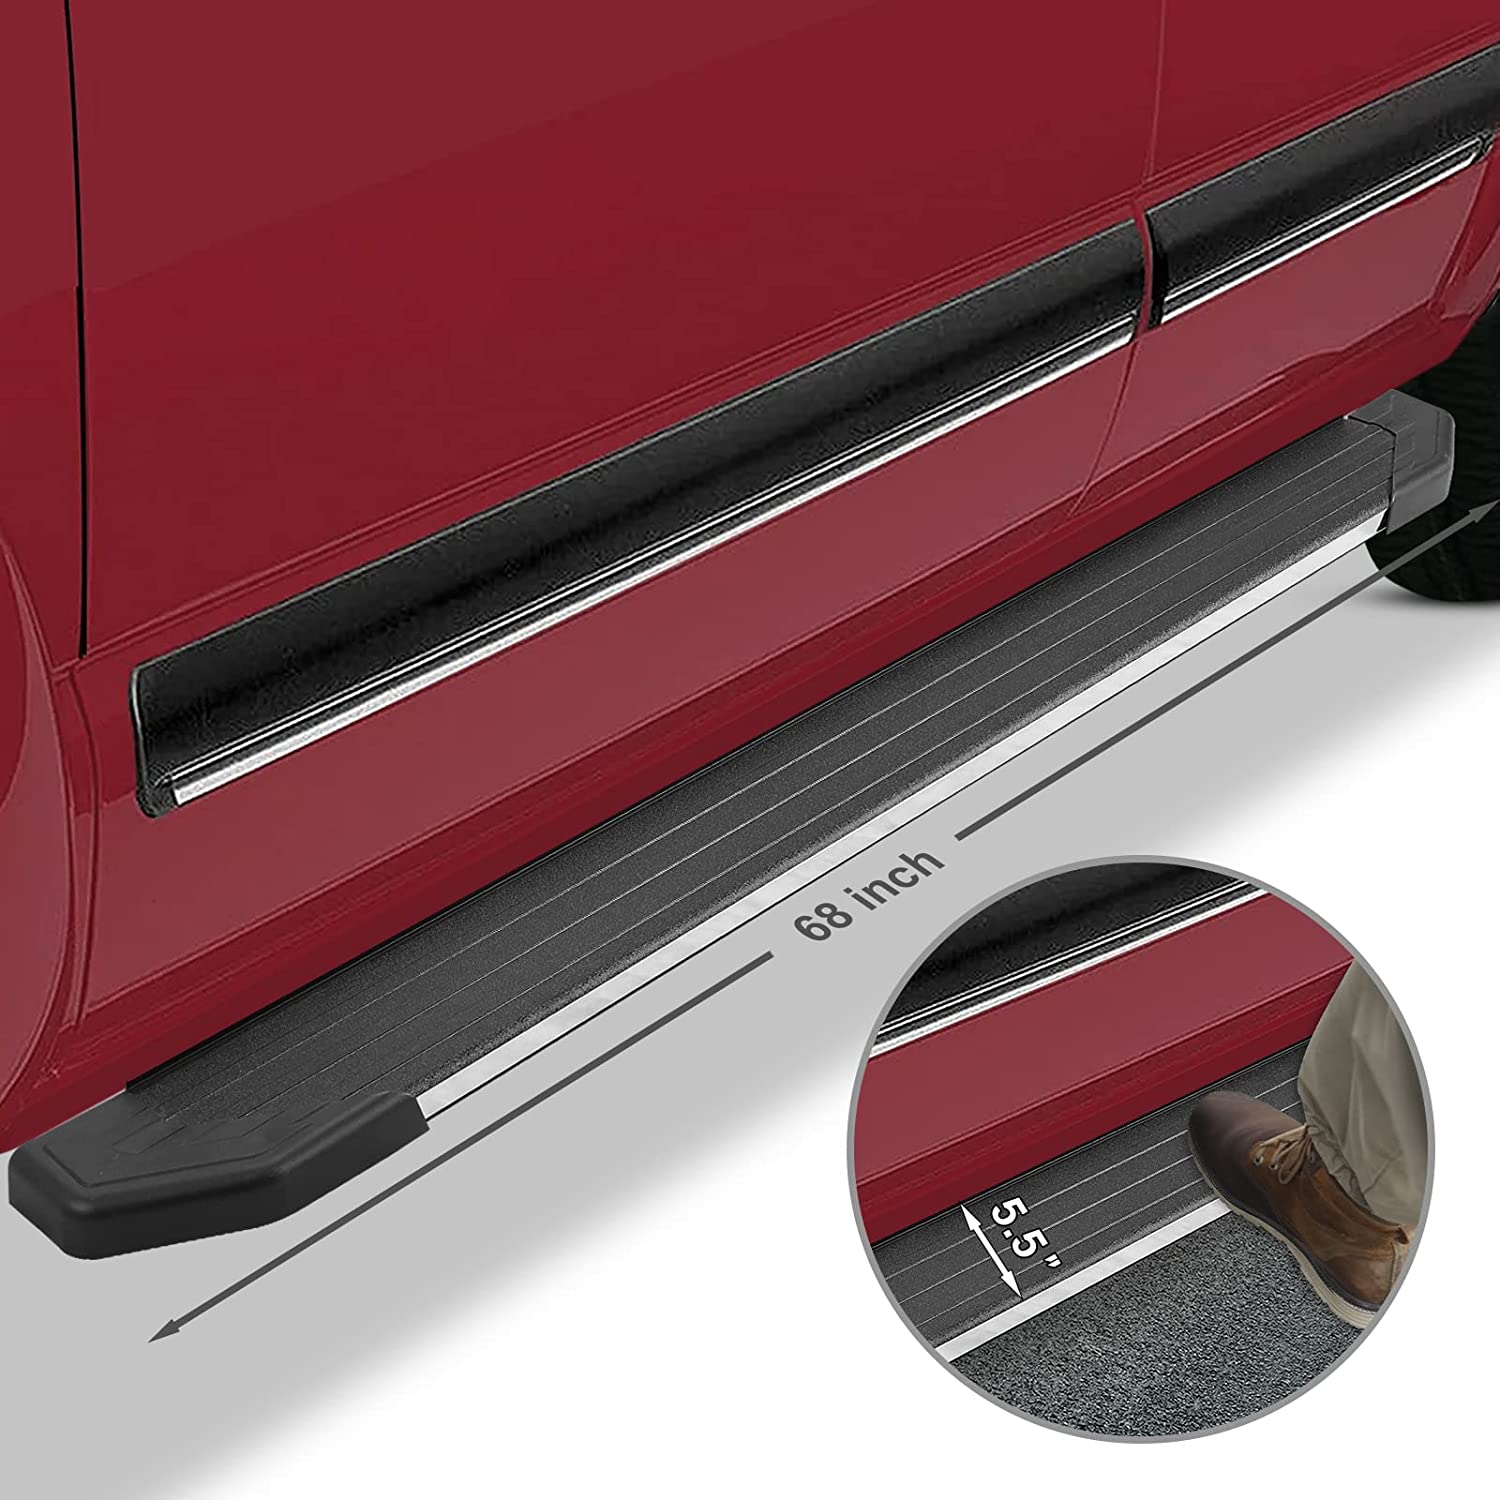 Aluminum Running Boards Compatible with 09-17 Chevy Traverse & 07-16 GMC Acadia & 07-09 Buick Enclave & 07-10 Saturn Outlook C70 Style. - COMNOVA AUTOPART